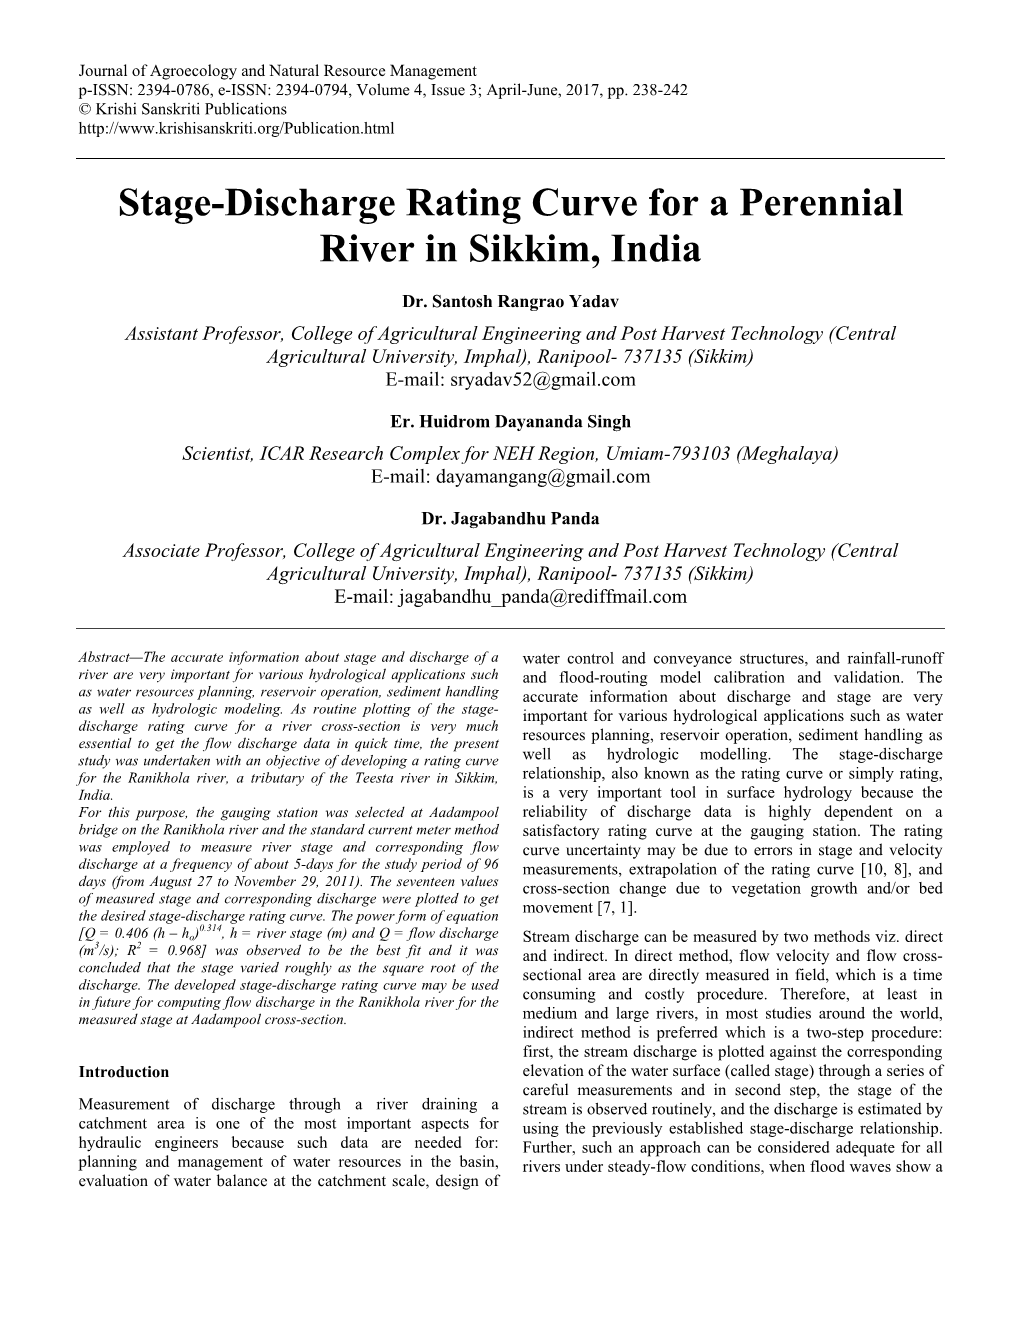 Stage-Discharge Rating Curve for a Perennial River in Sikkim, India